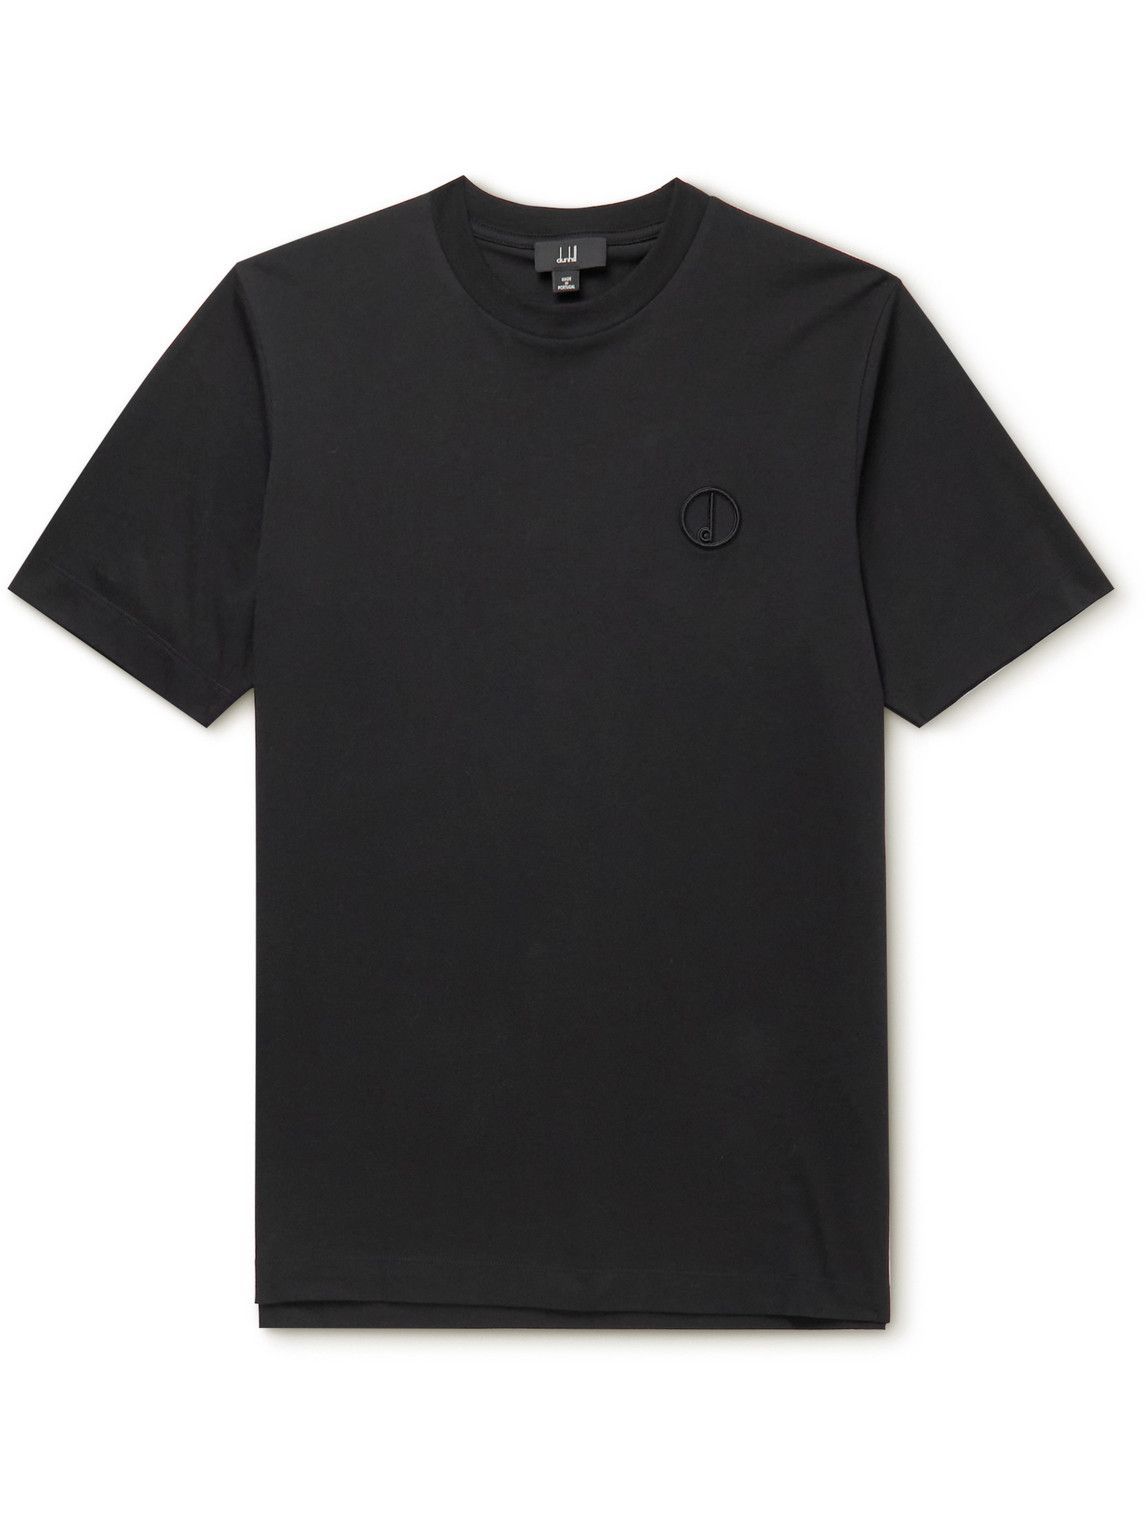 Dunhill - Logo-Embroidered Cotton-Jersey T-Shirt - Unknown Dunhill